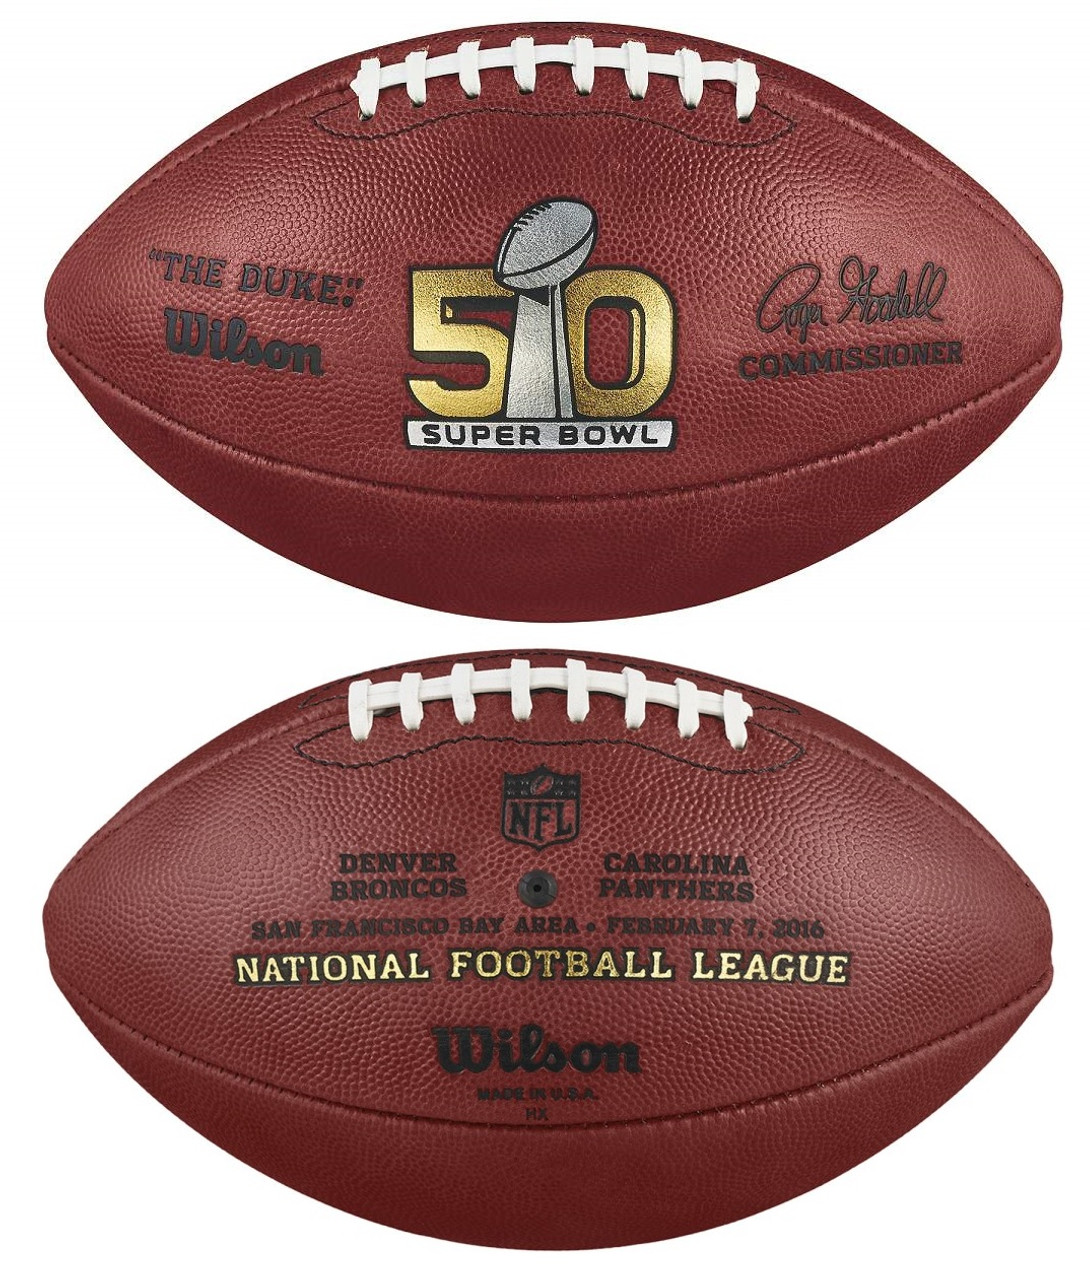 Super Bowl L (Fifty 50) Denver Broncos vs. Carolina Panthers Official  Leather Authentic Game Football by Wilson